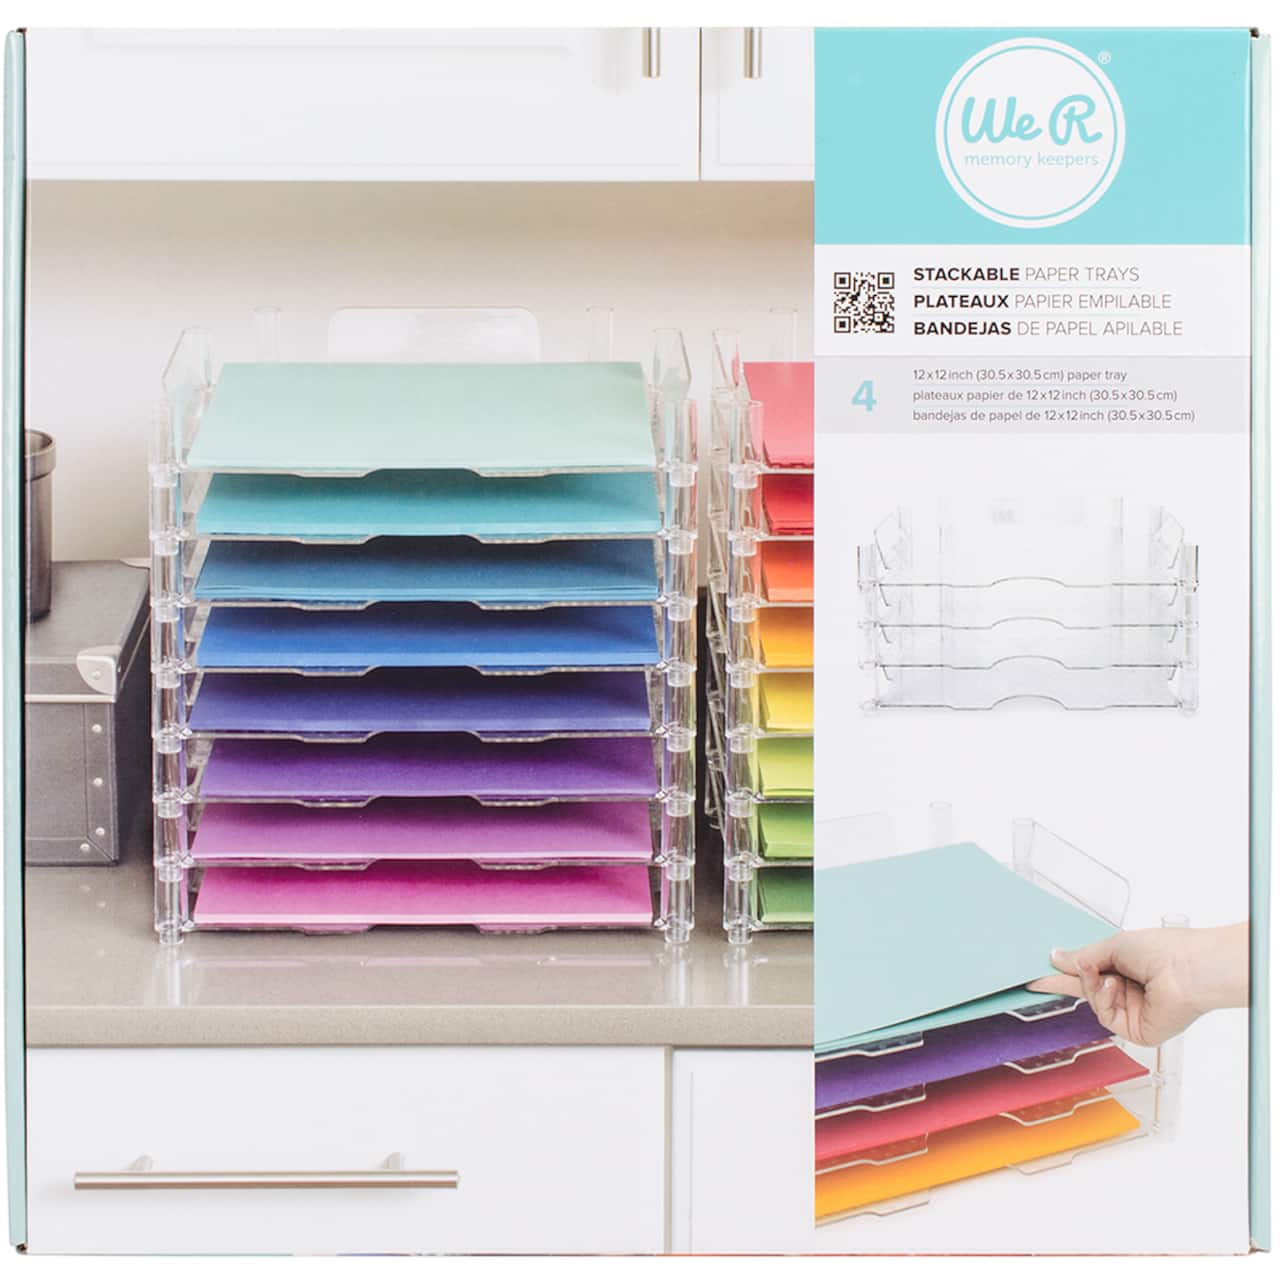 We R Memory Keepers® Clear Stackable Acrylic Paper Trays, 4ct.